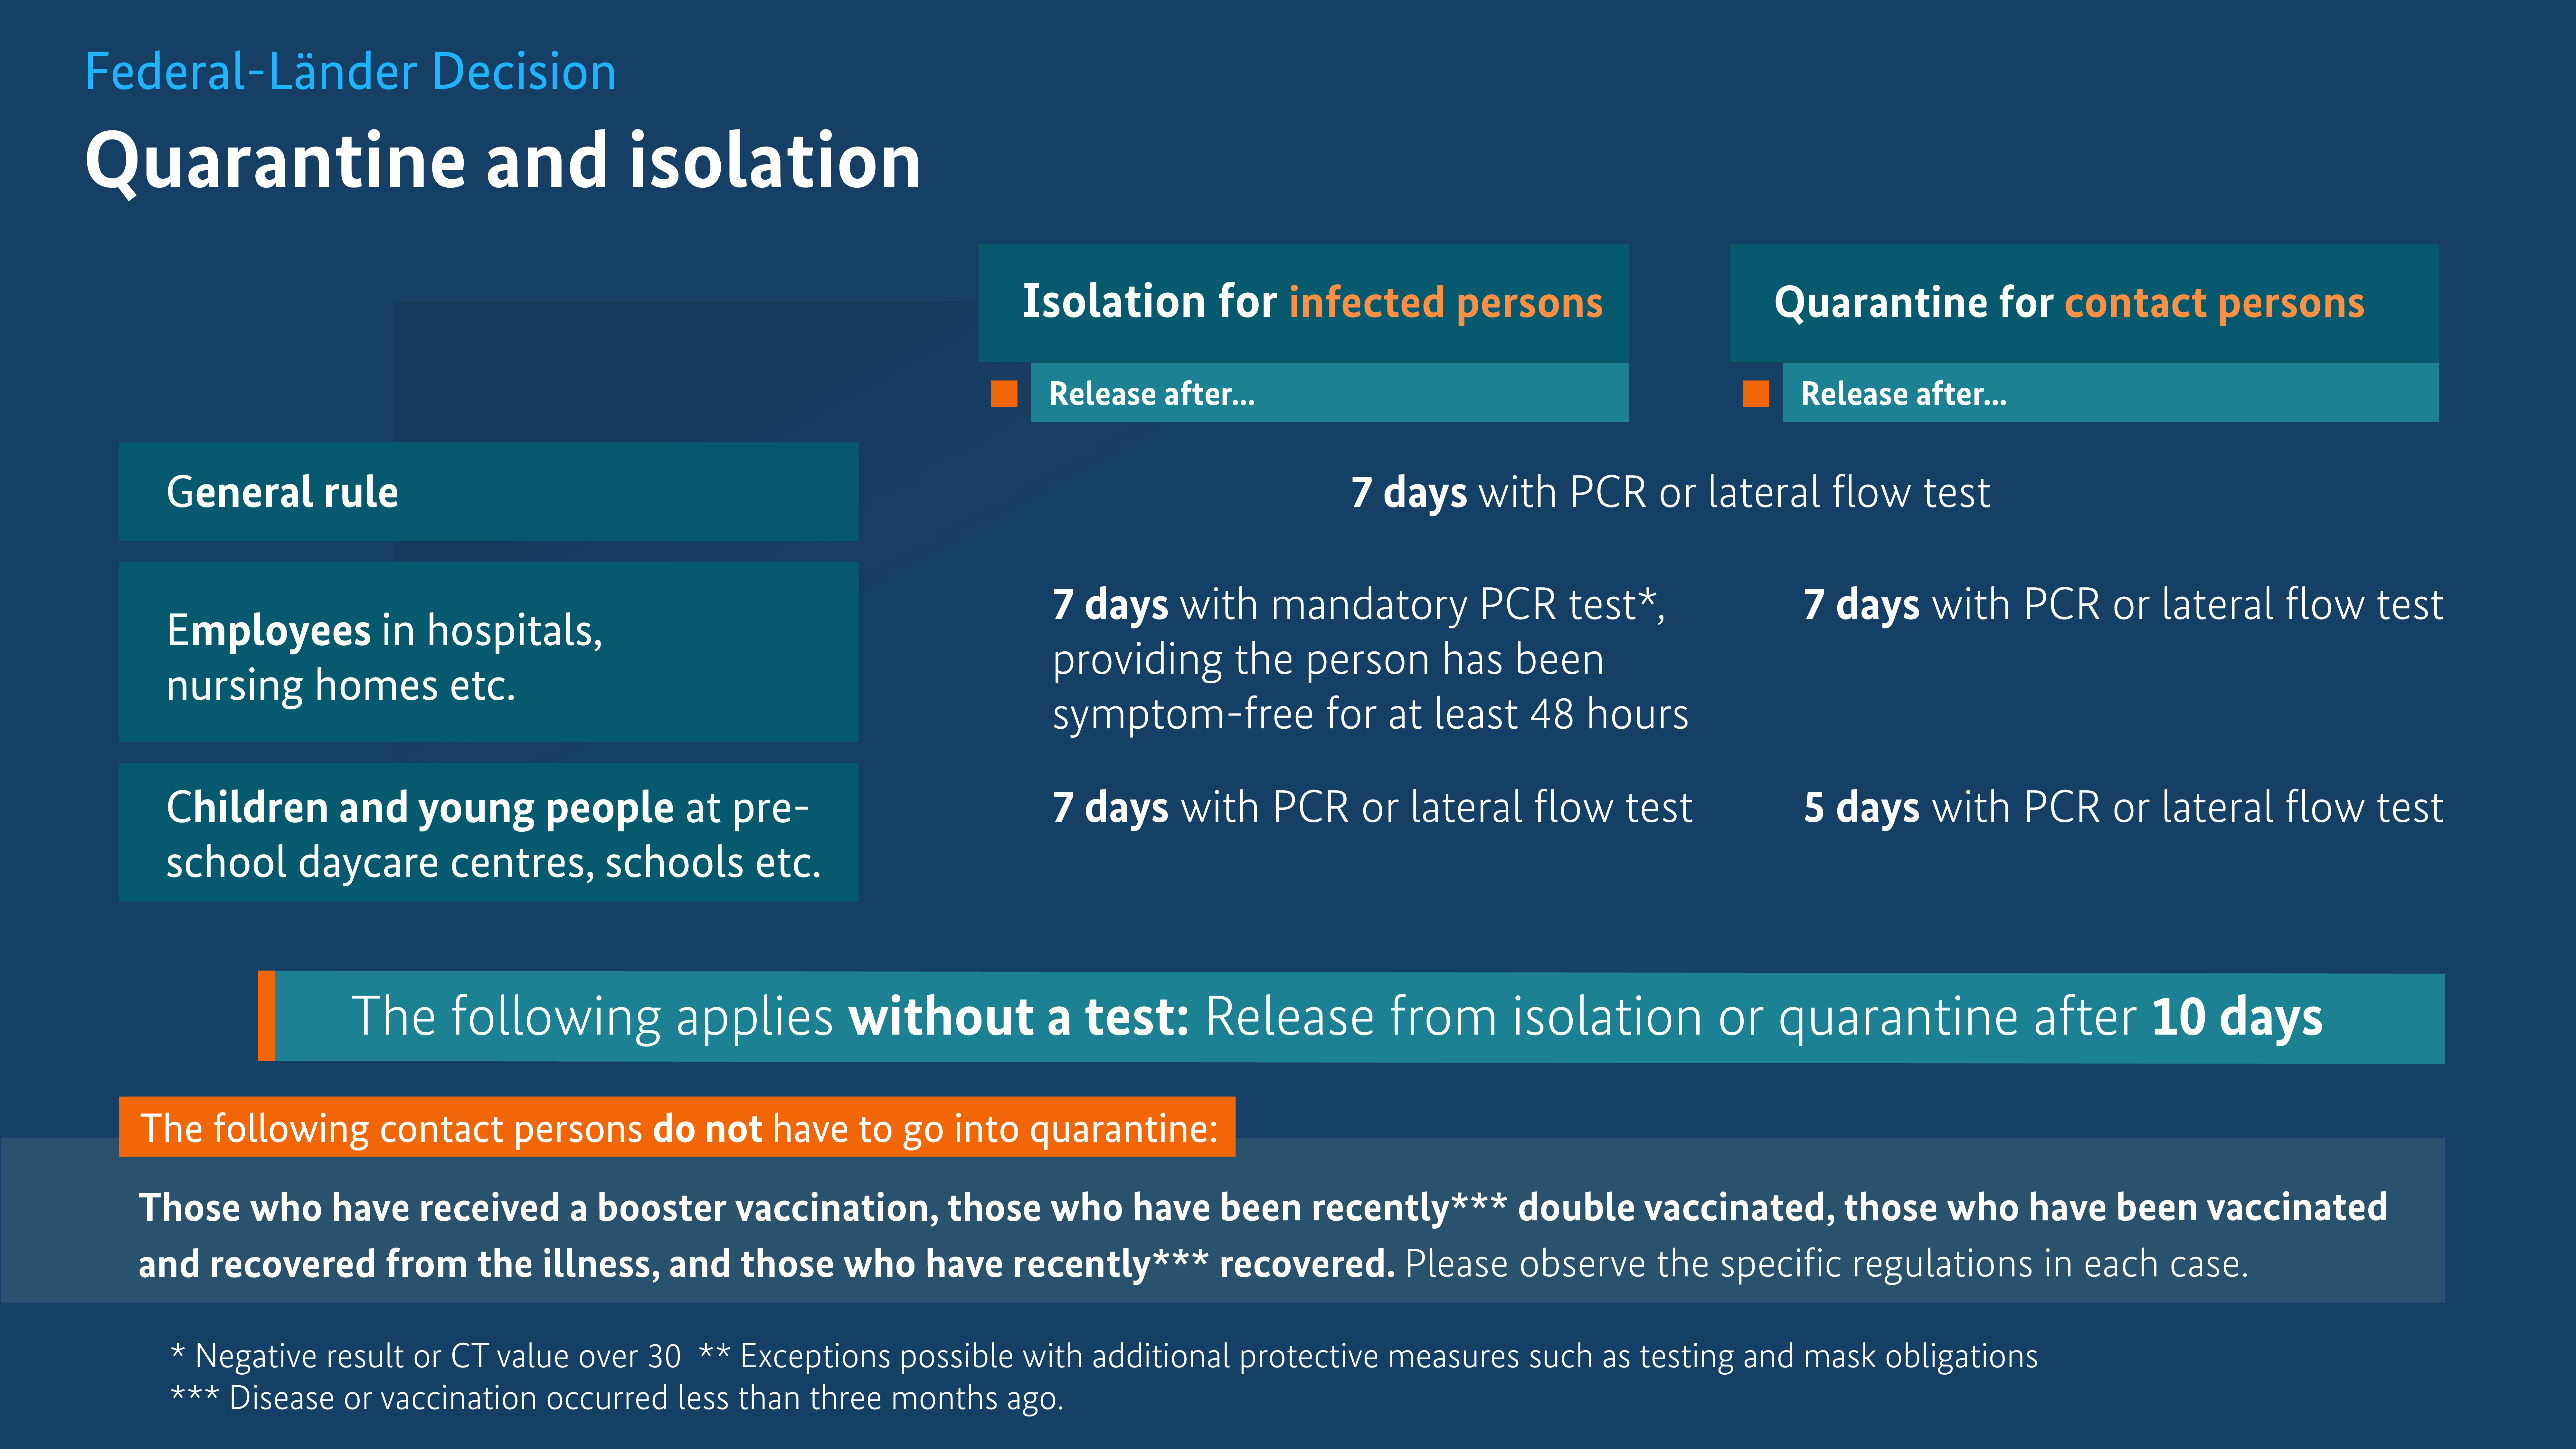 Rules for quarantine and isolation agreed on by the Federal and Länder Governments. Details in the description of the graphic.